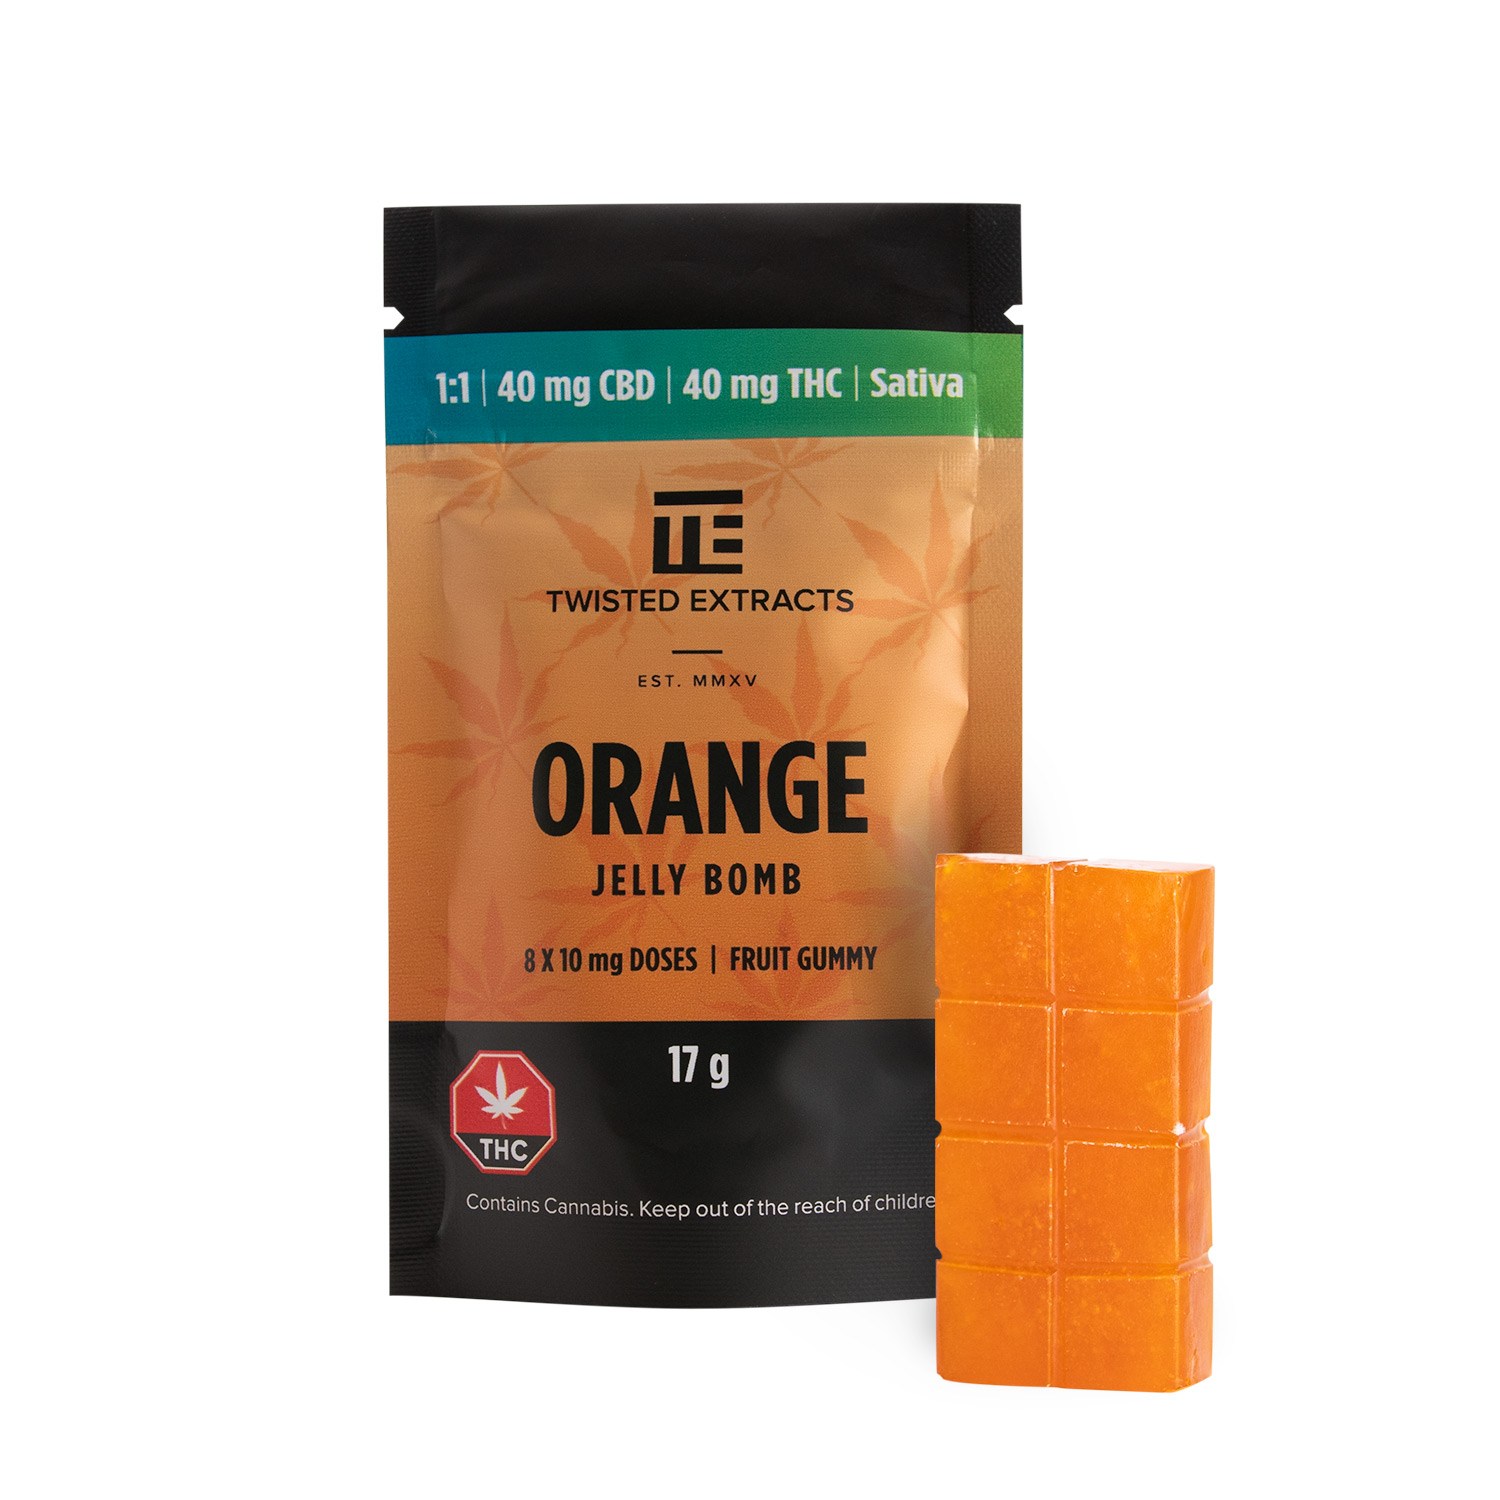 Twisted Extracts Orange THC & CBD Gummies | Weed Deals